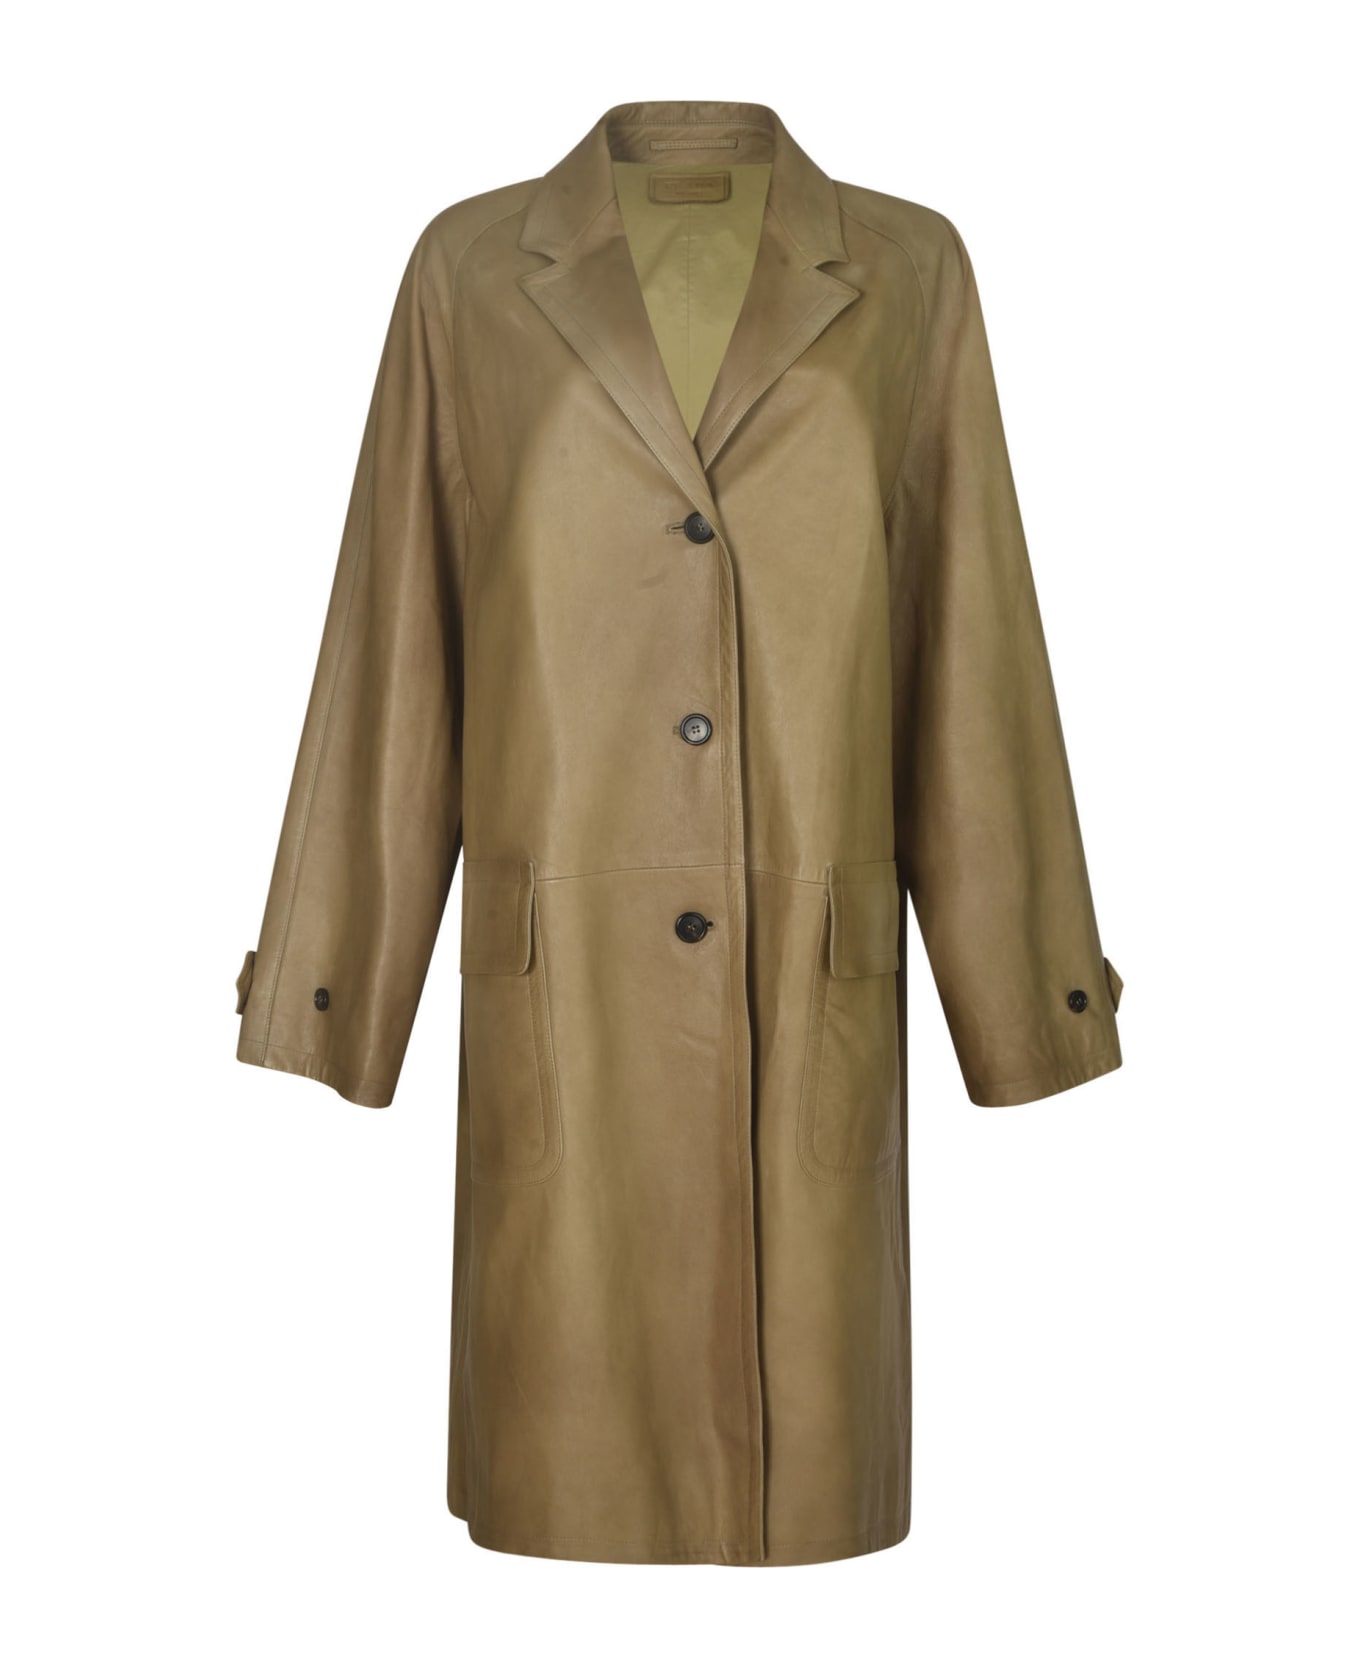 Prada Mid-length Buttoned Coat - Coloniale